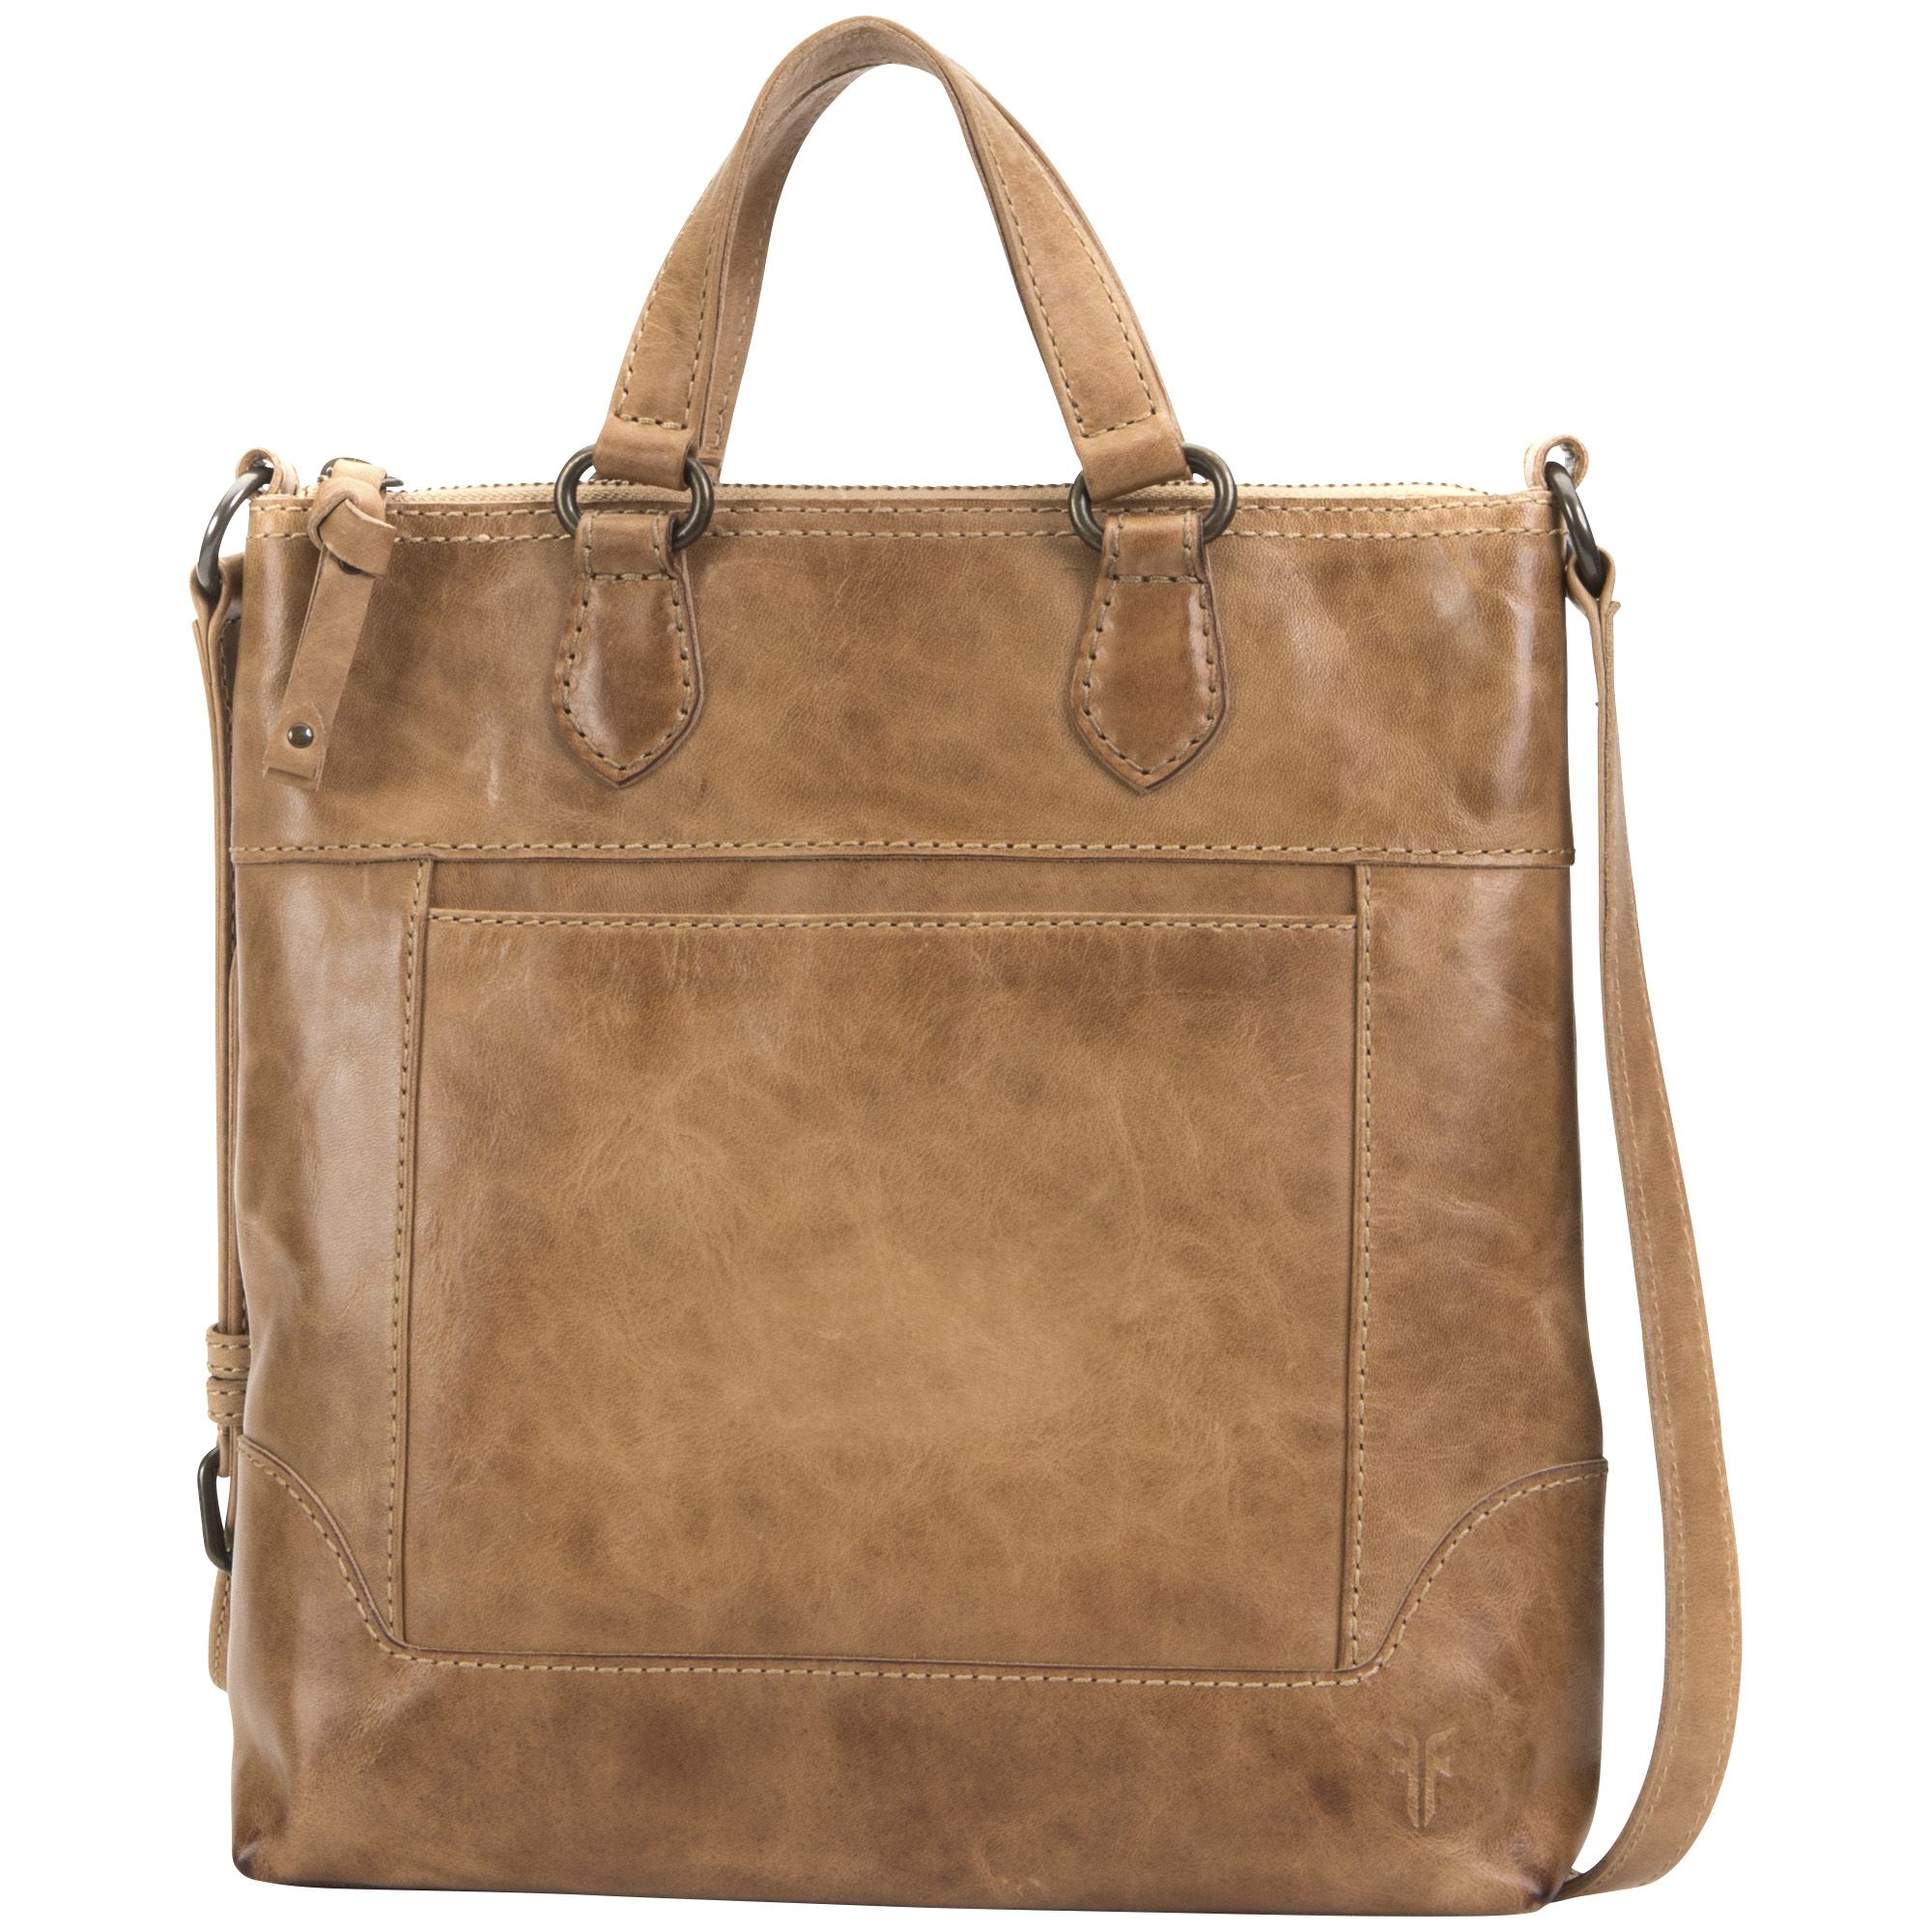 FRYE Melissa Small Tote Crossbody Leather Bag